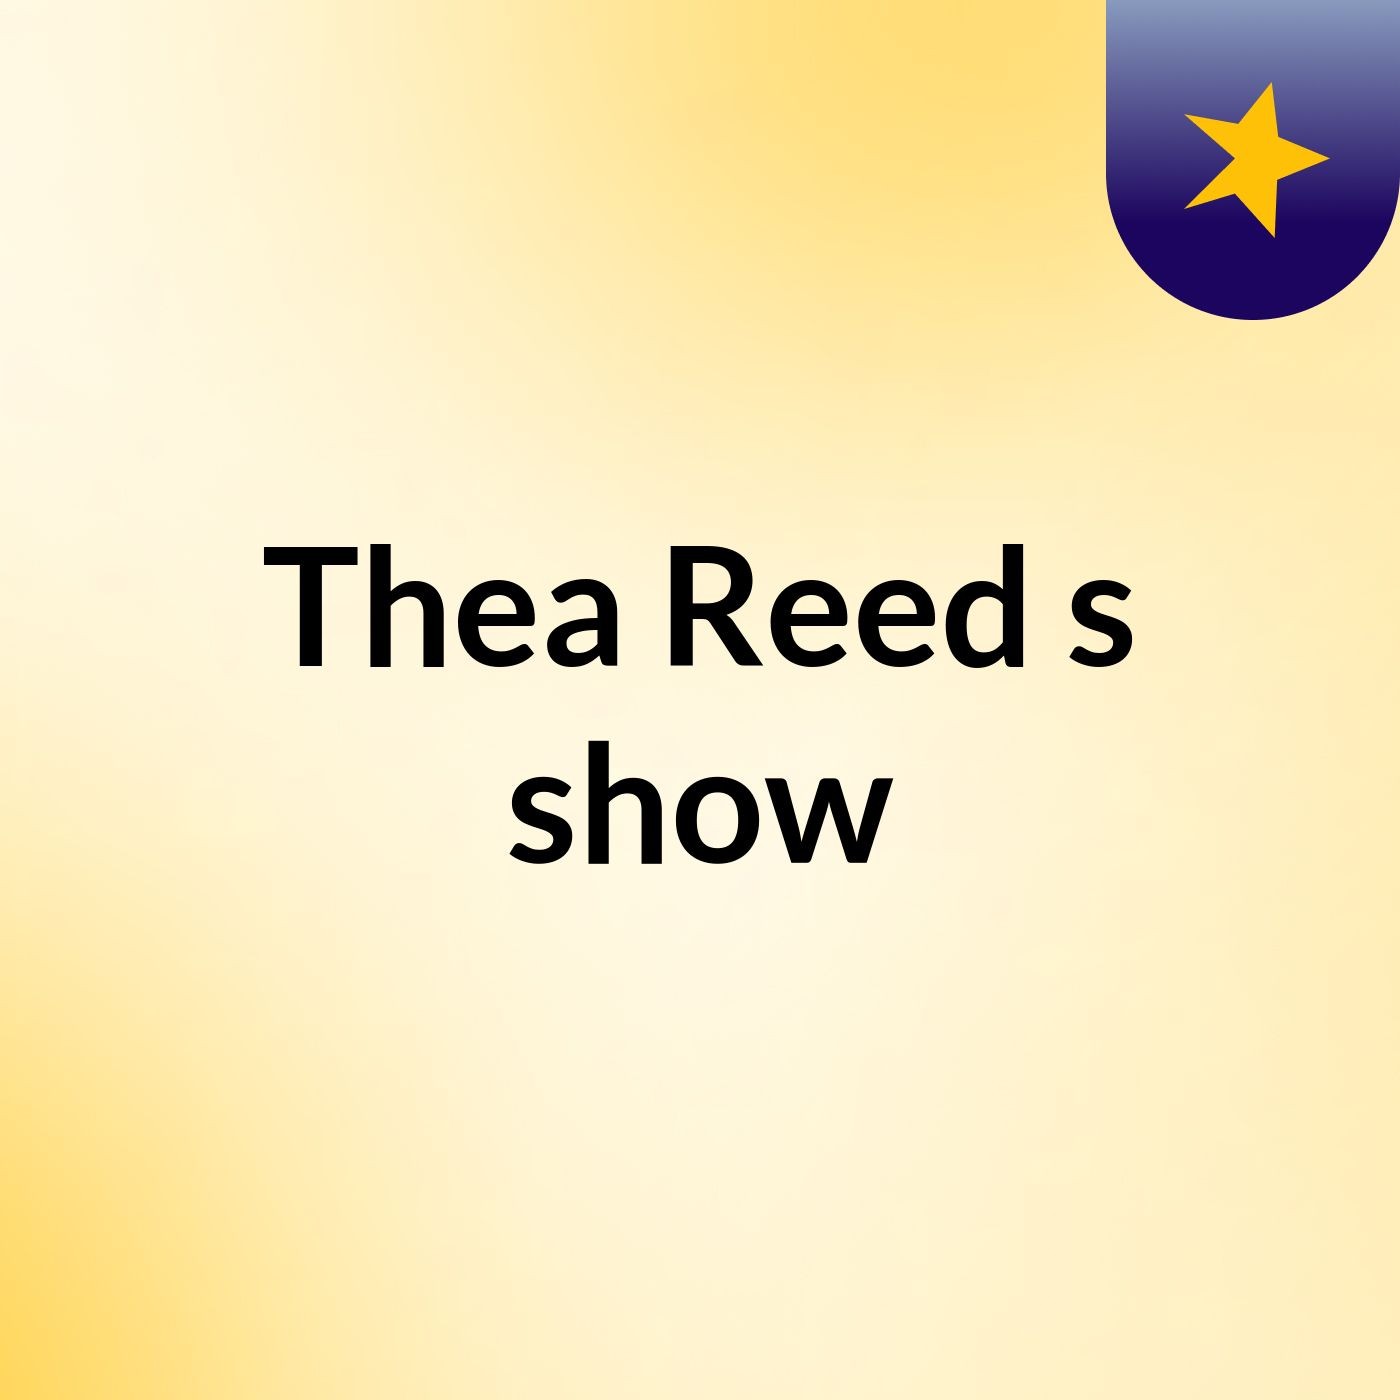 Thea Reed's show